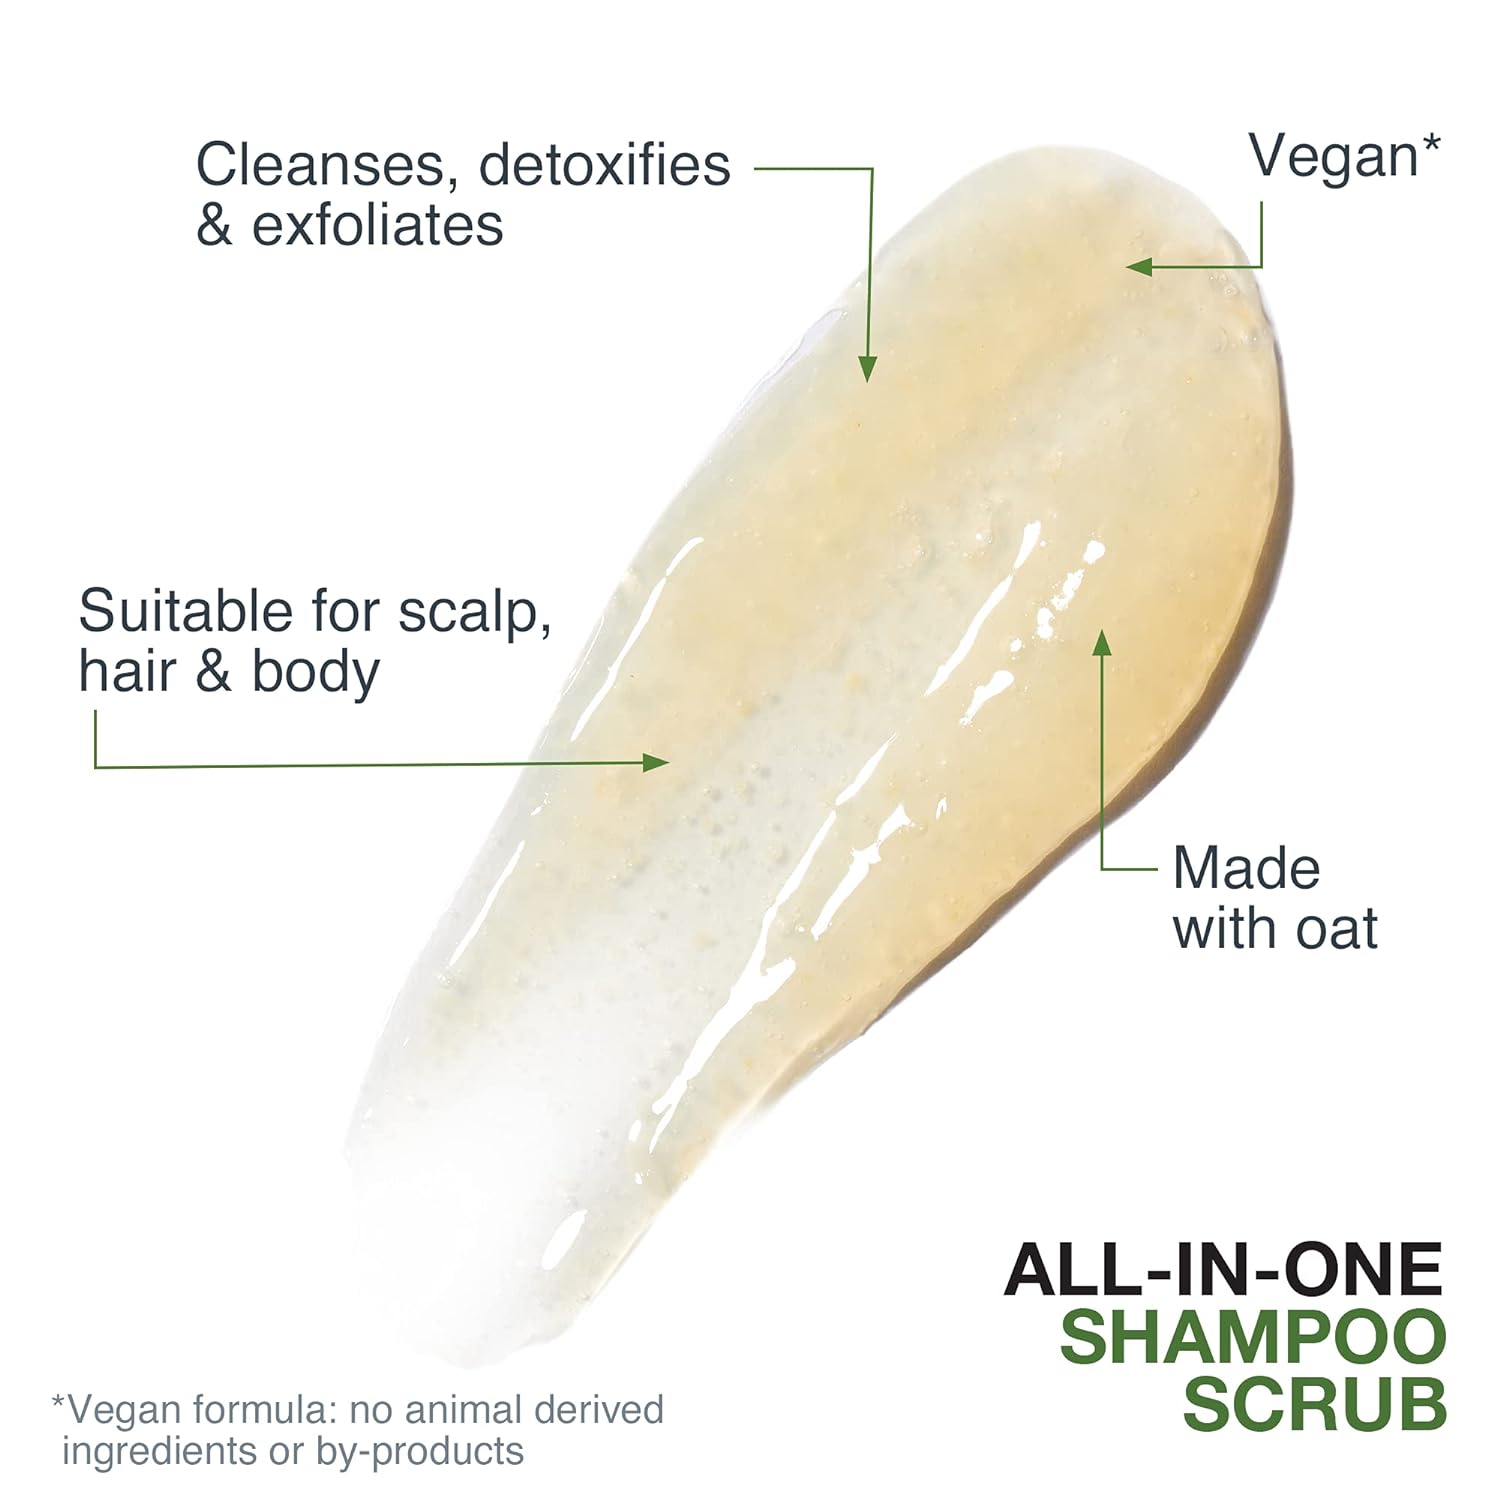 Biolage All-In-One Multi-Benefit Shampoo Scrub | Cleanses, Detoxifies & Gently Exfoliates Scalp | For All Hair Types | Vegan | 1 Fl. Oz. : Beauty & Personal Care